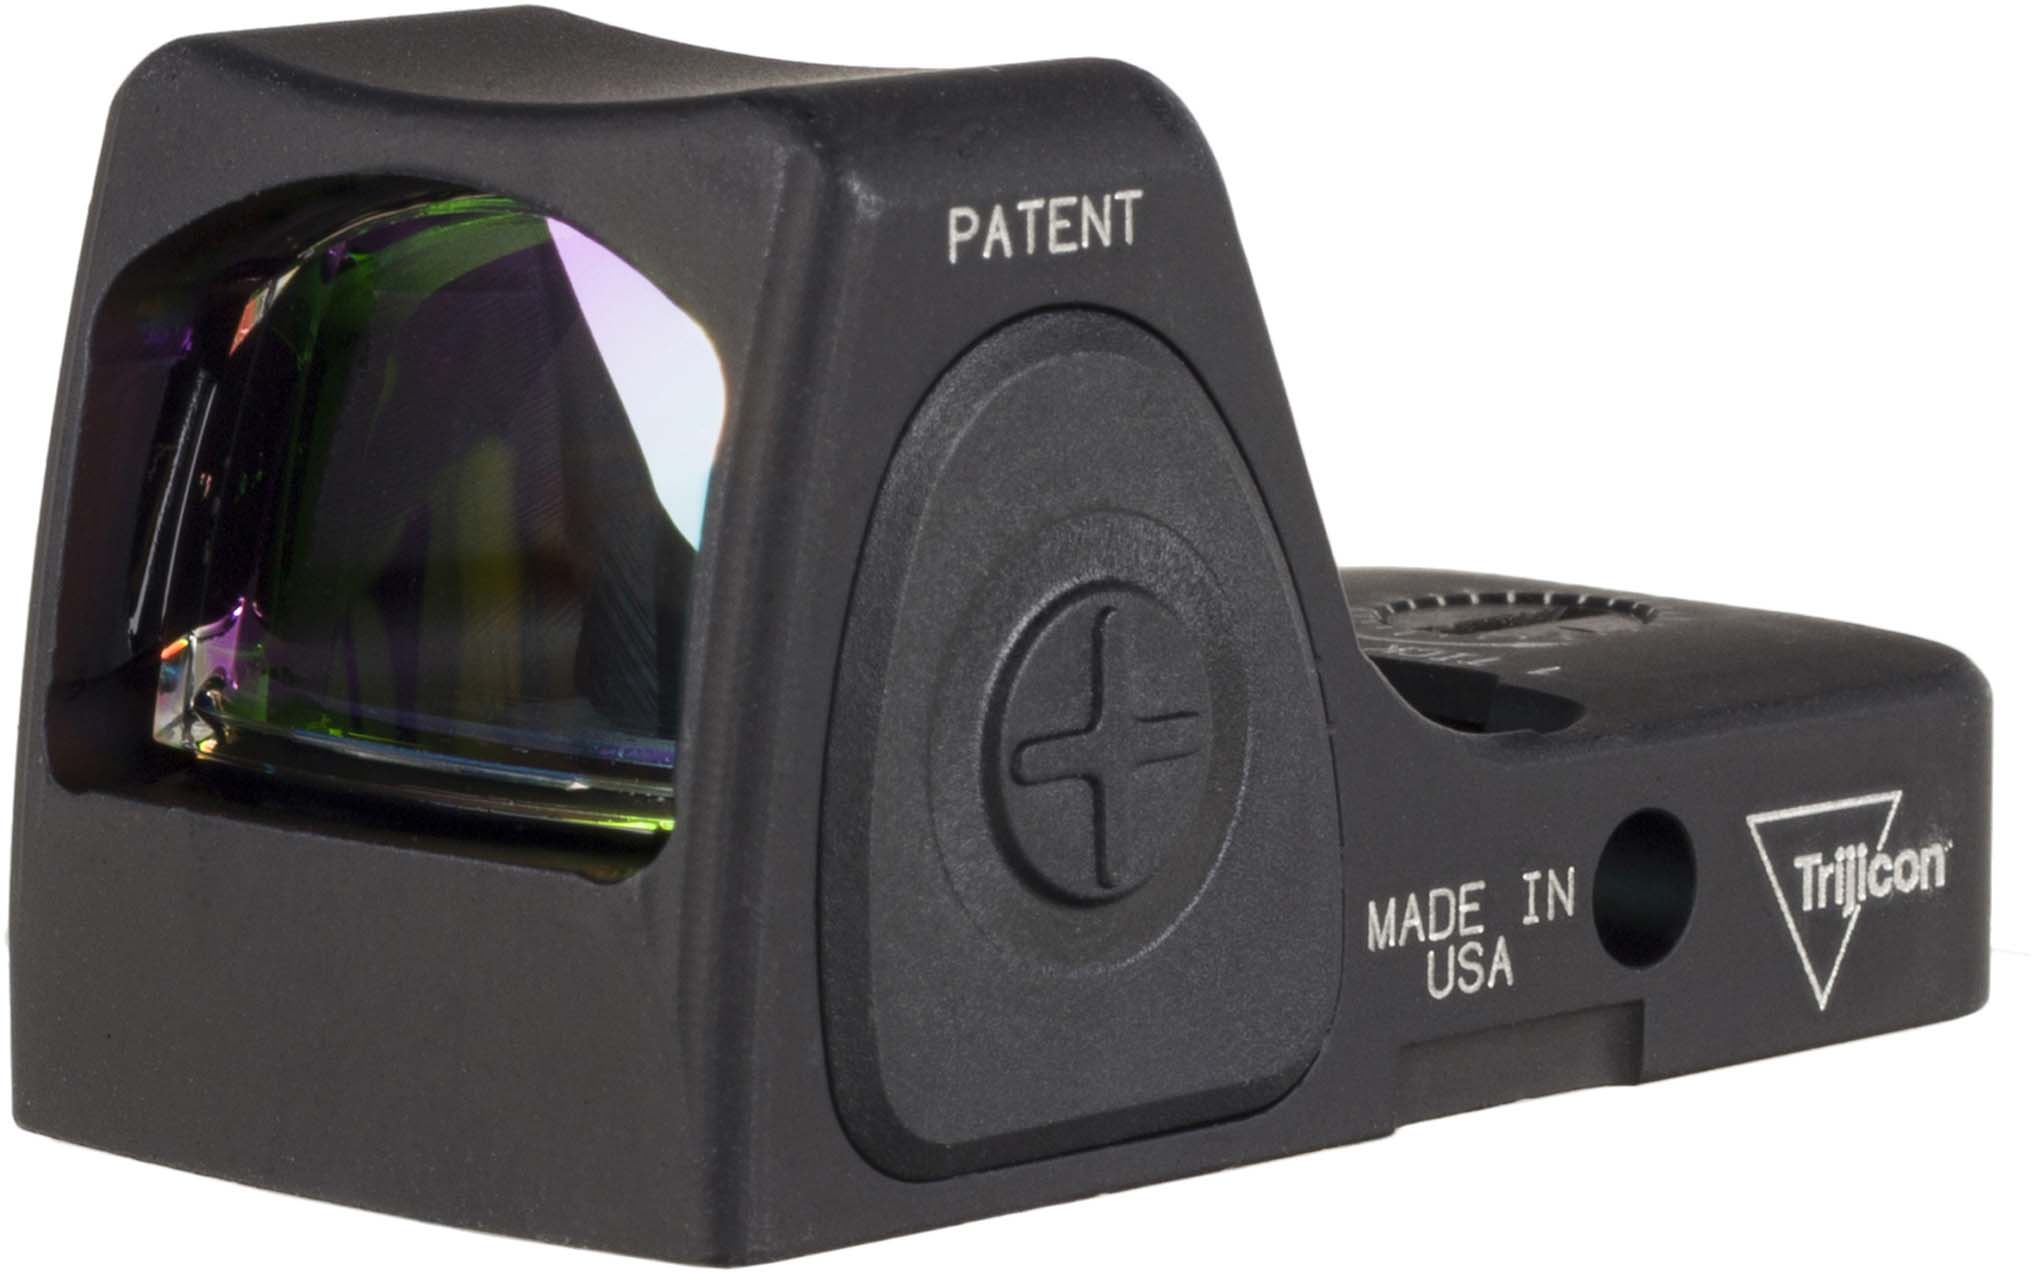 The Trijicon RMRcc Red Dot Sight for Compact Pistols.